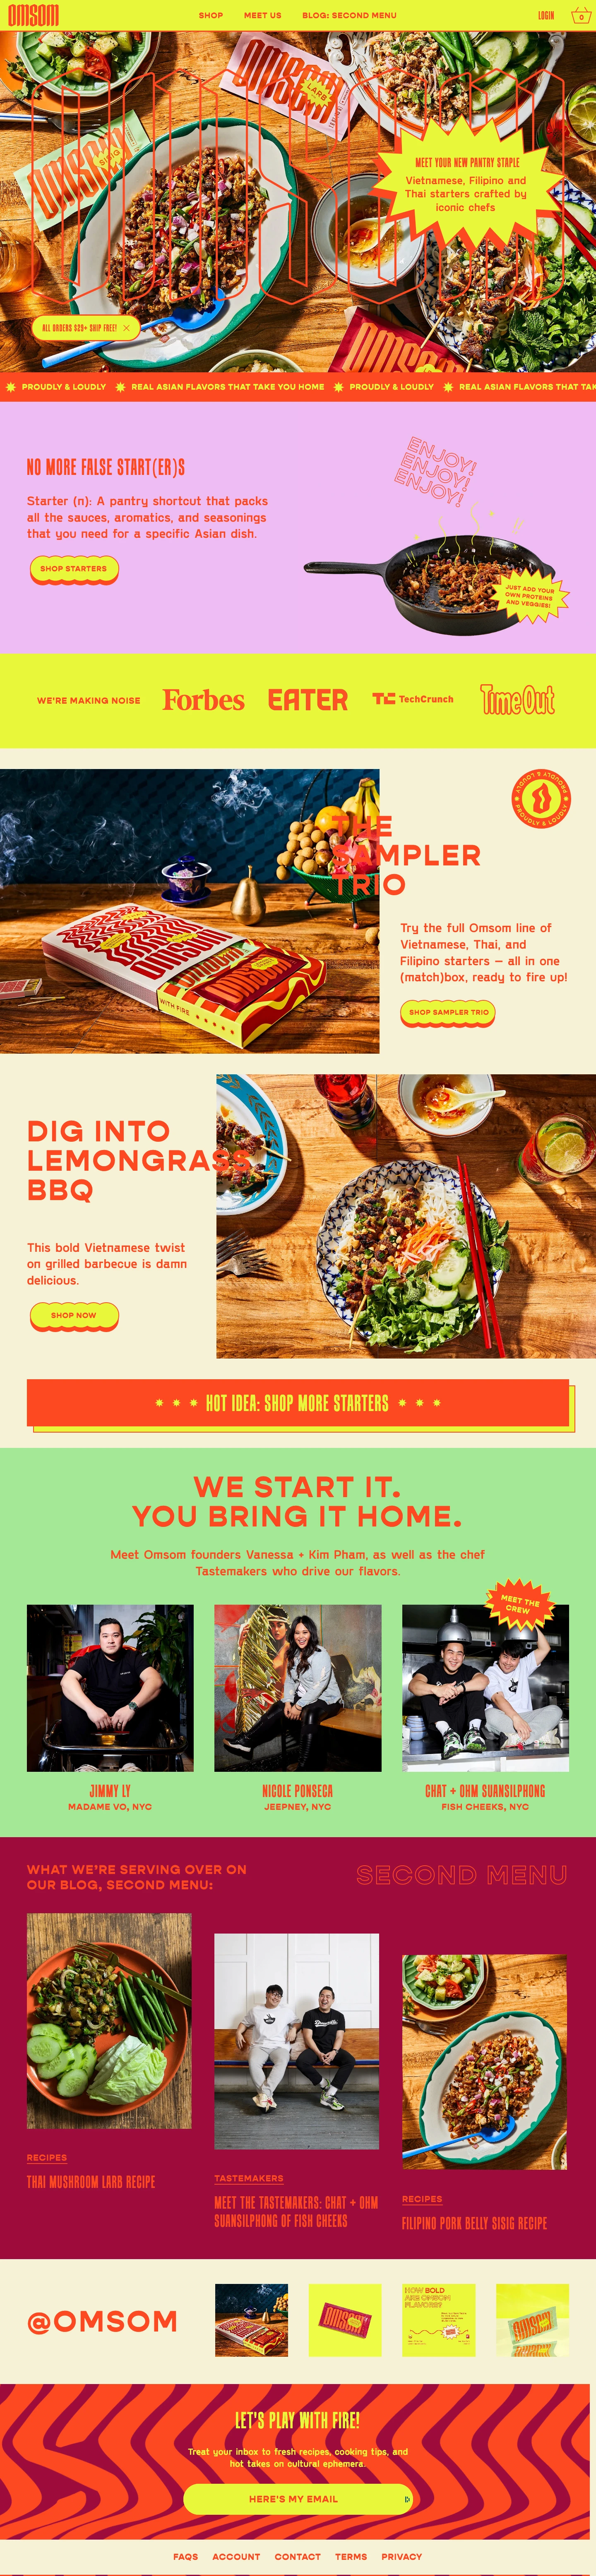 Omsom Landing Page Example: Meet your new pantry shortcut: Vietnamese, Filipino, and Thai starters crafted by iconic chefs. Omsom brings proud, loud Asian flavors to your fingertips any day of the week, sitting in your pantry right between the tomato sauce and olive oil.